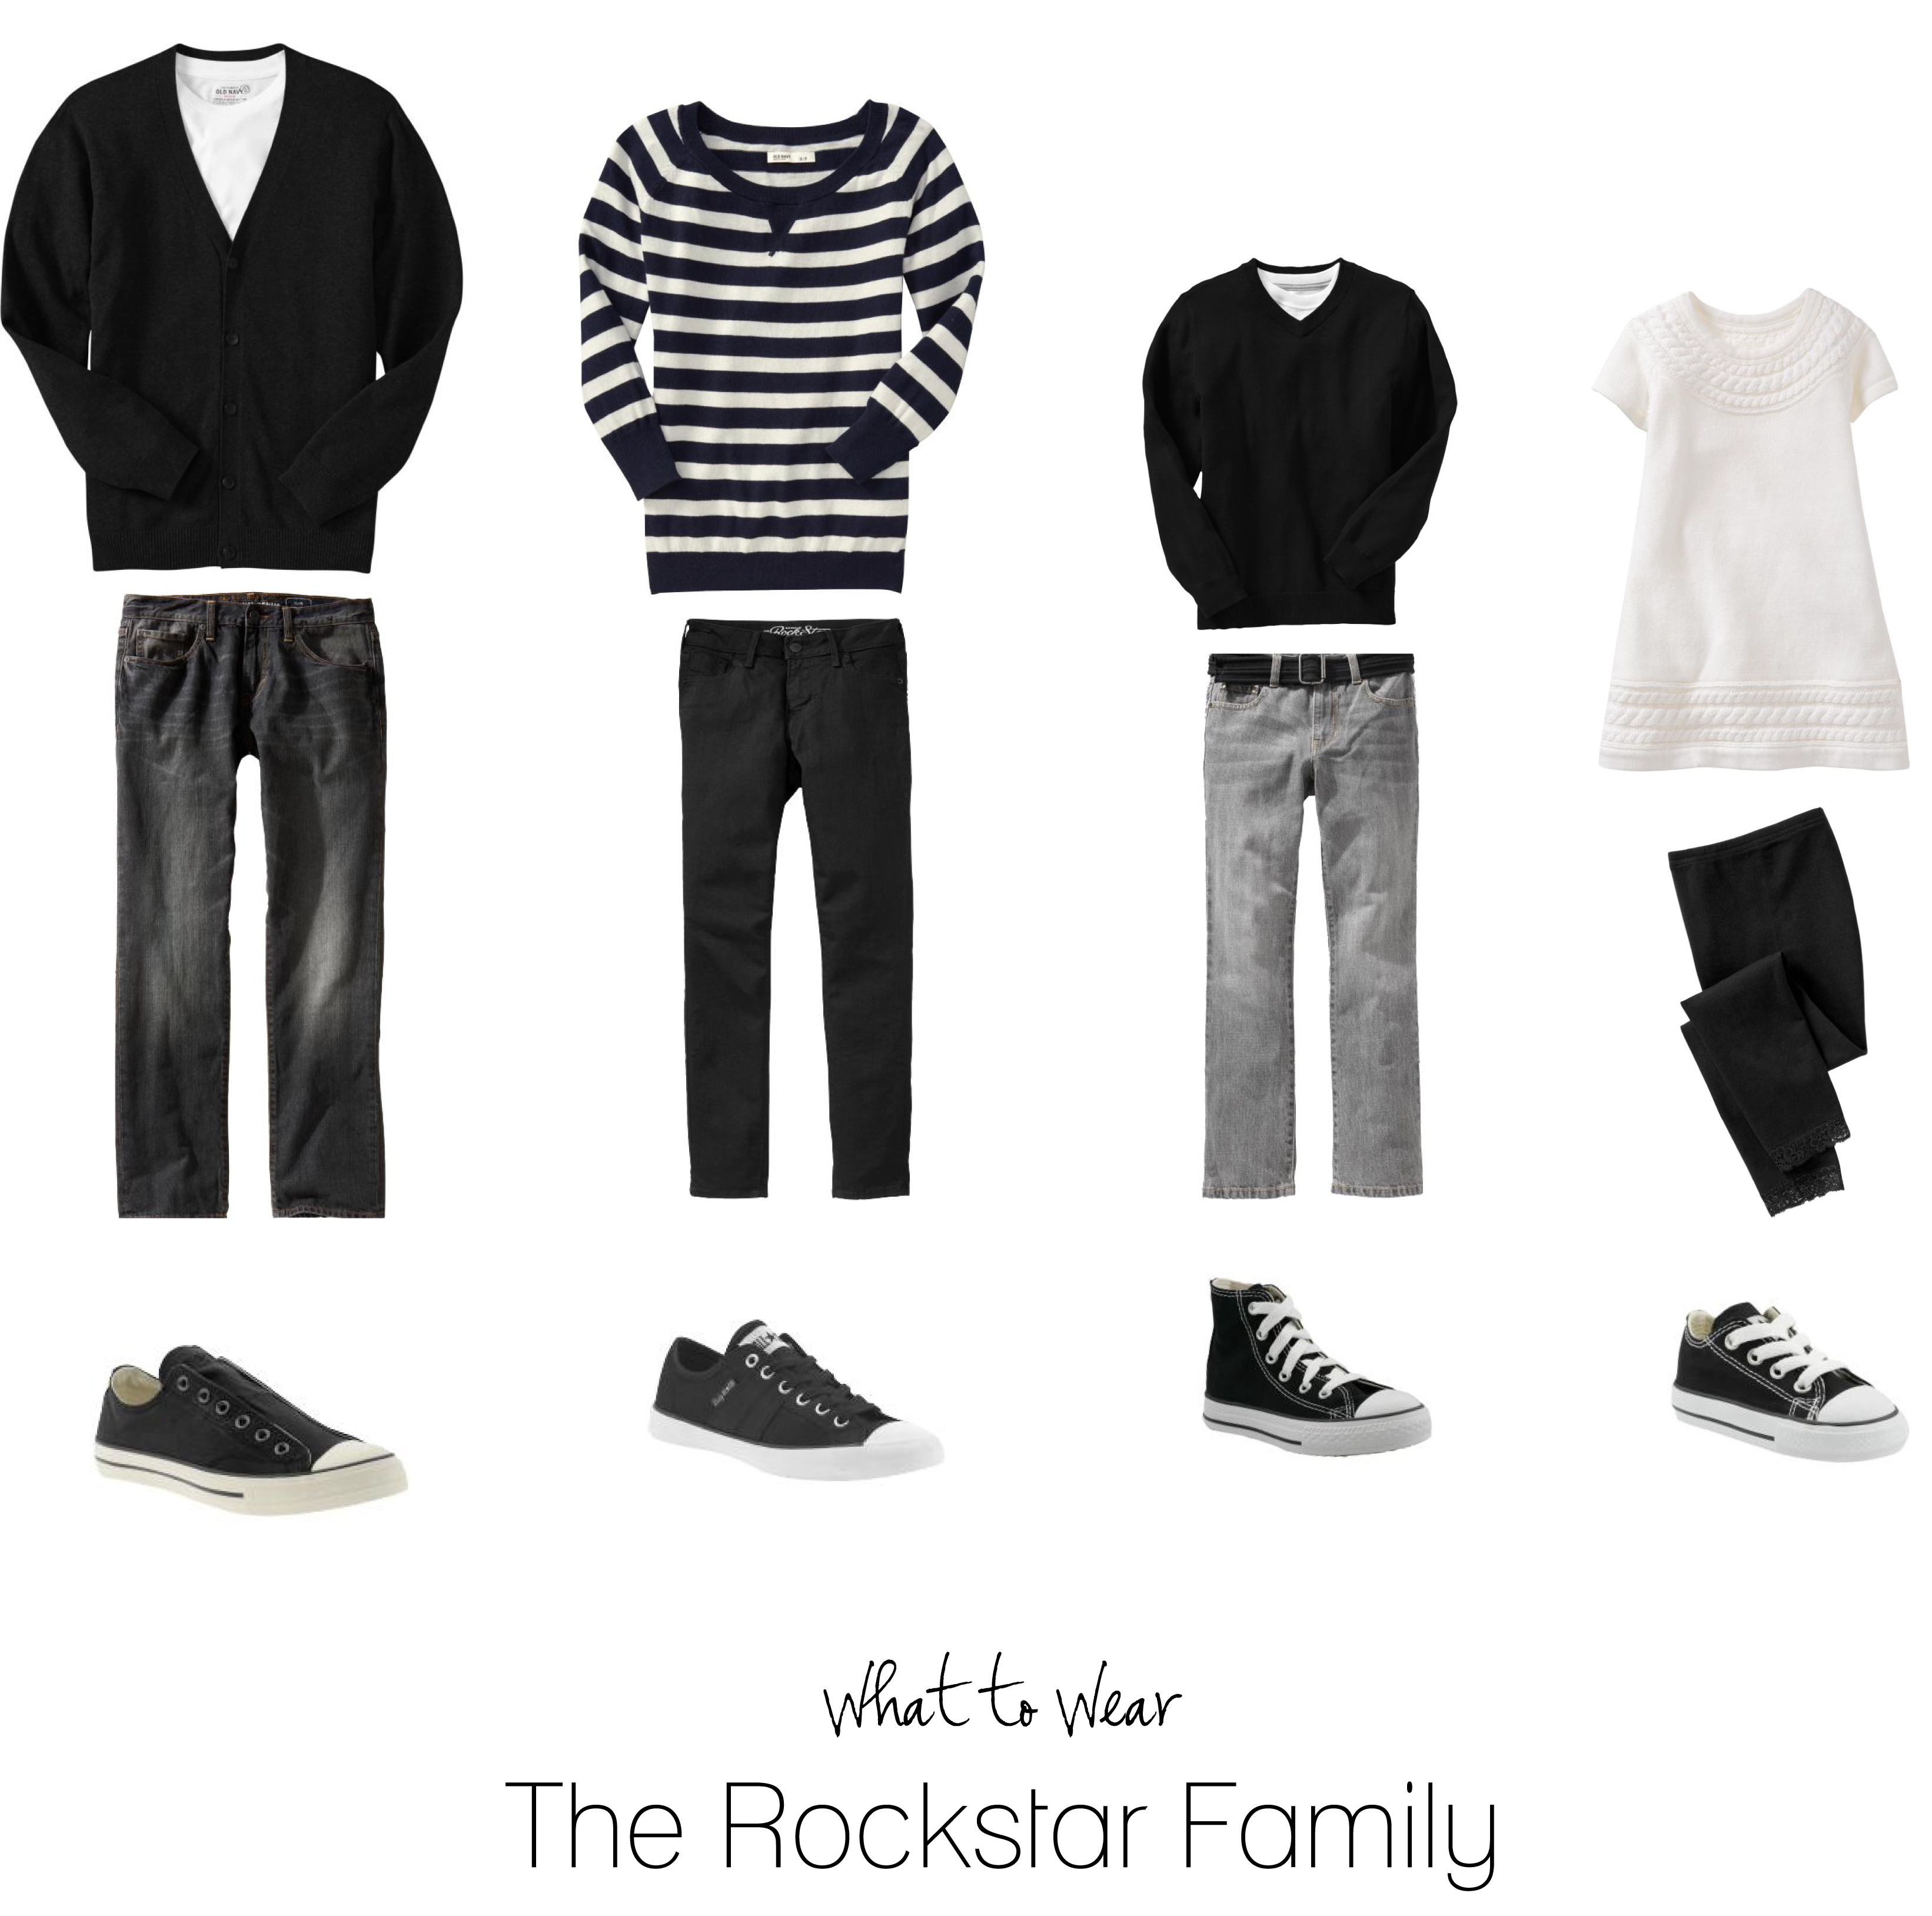 What to wear for the rockstar family